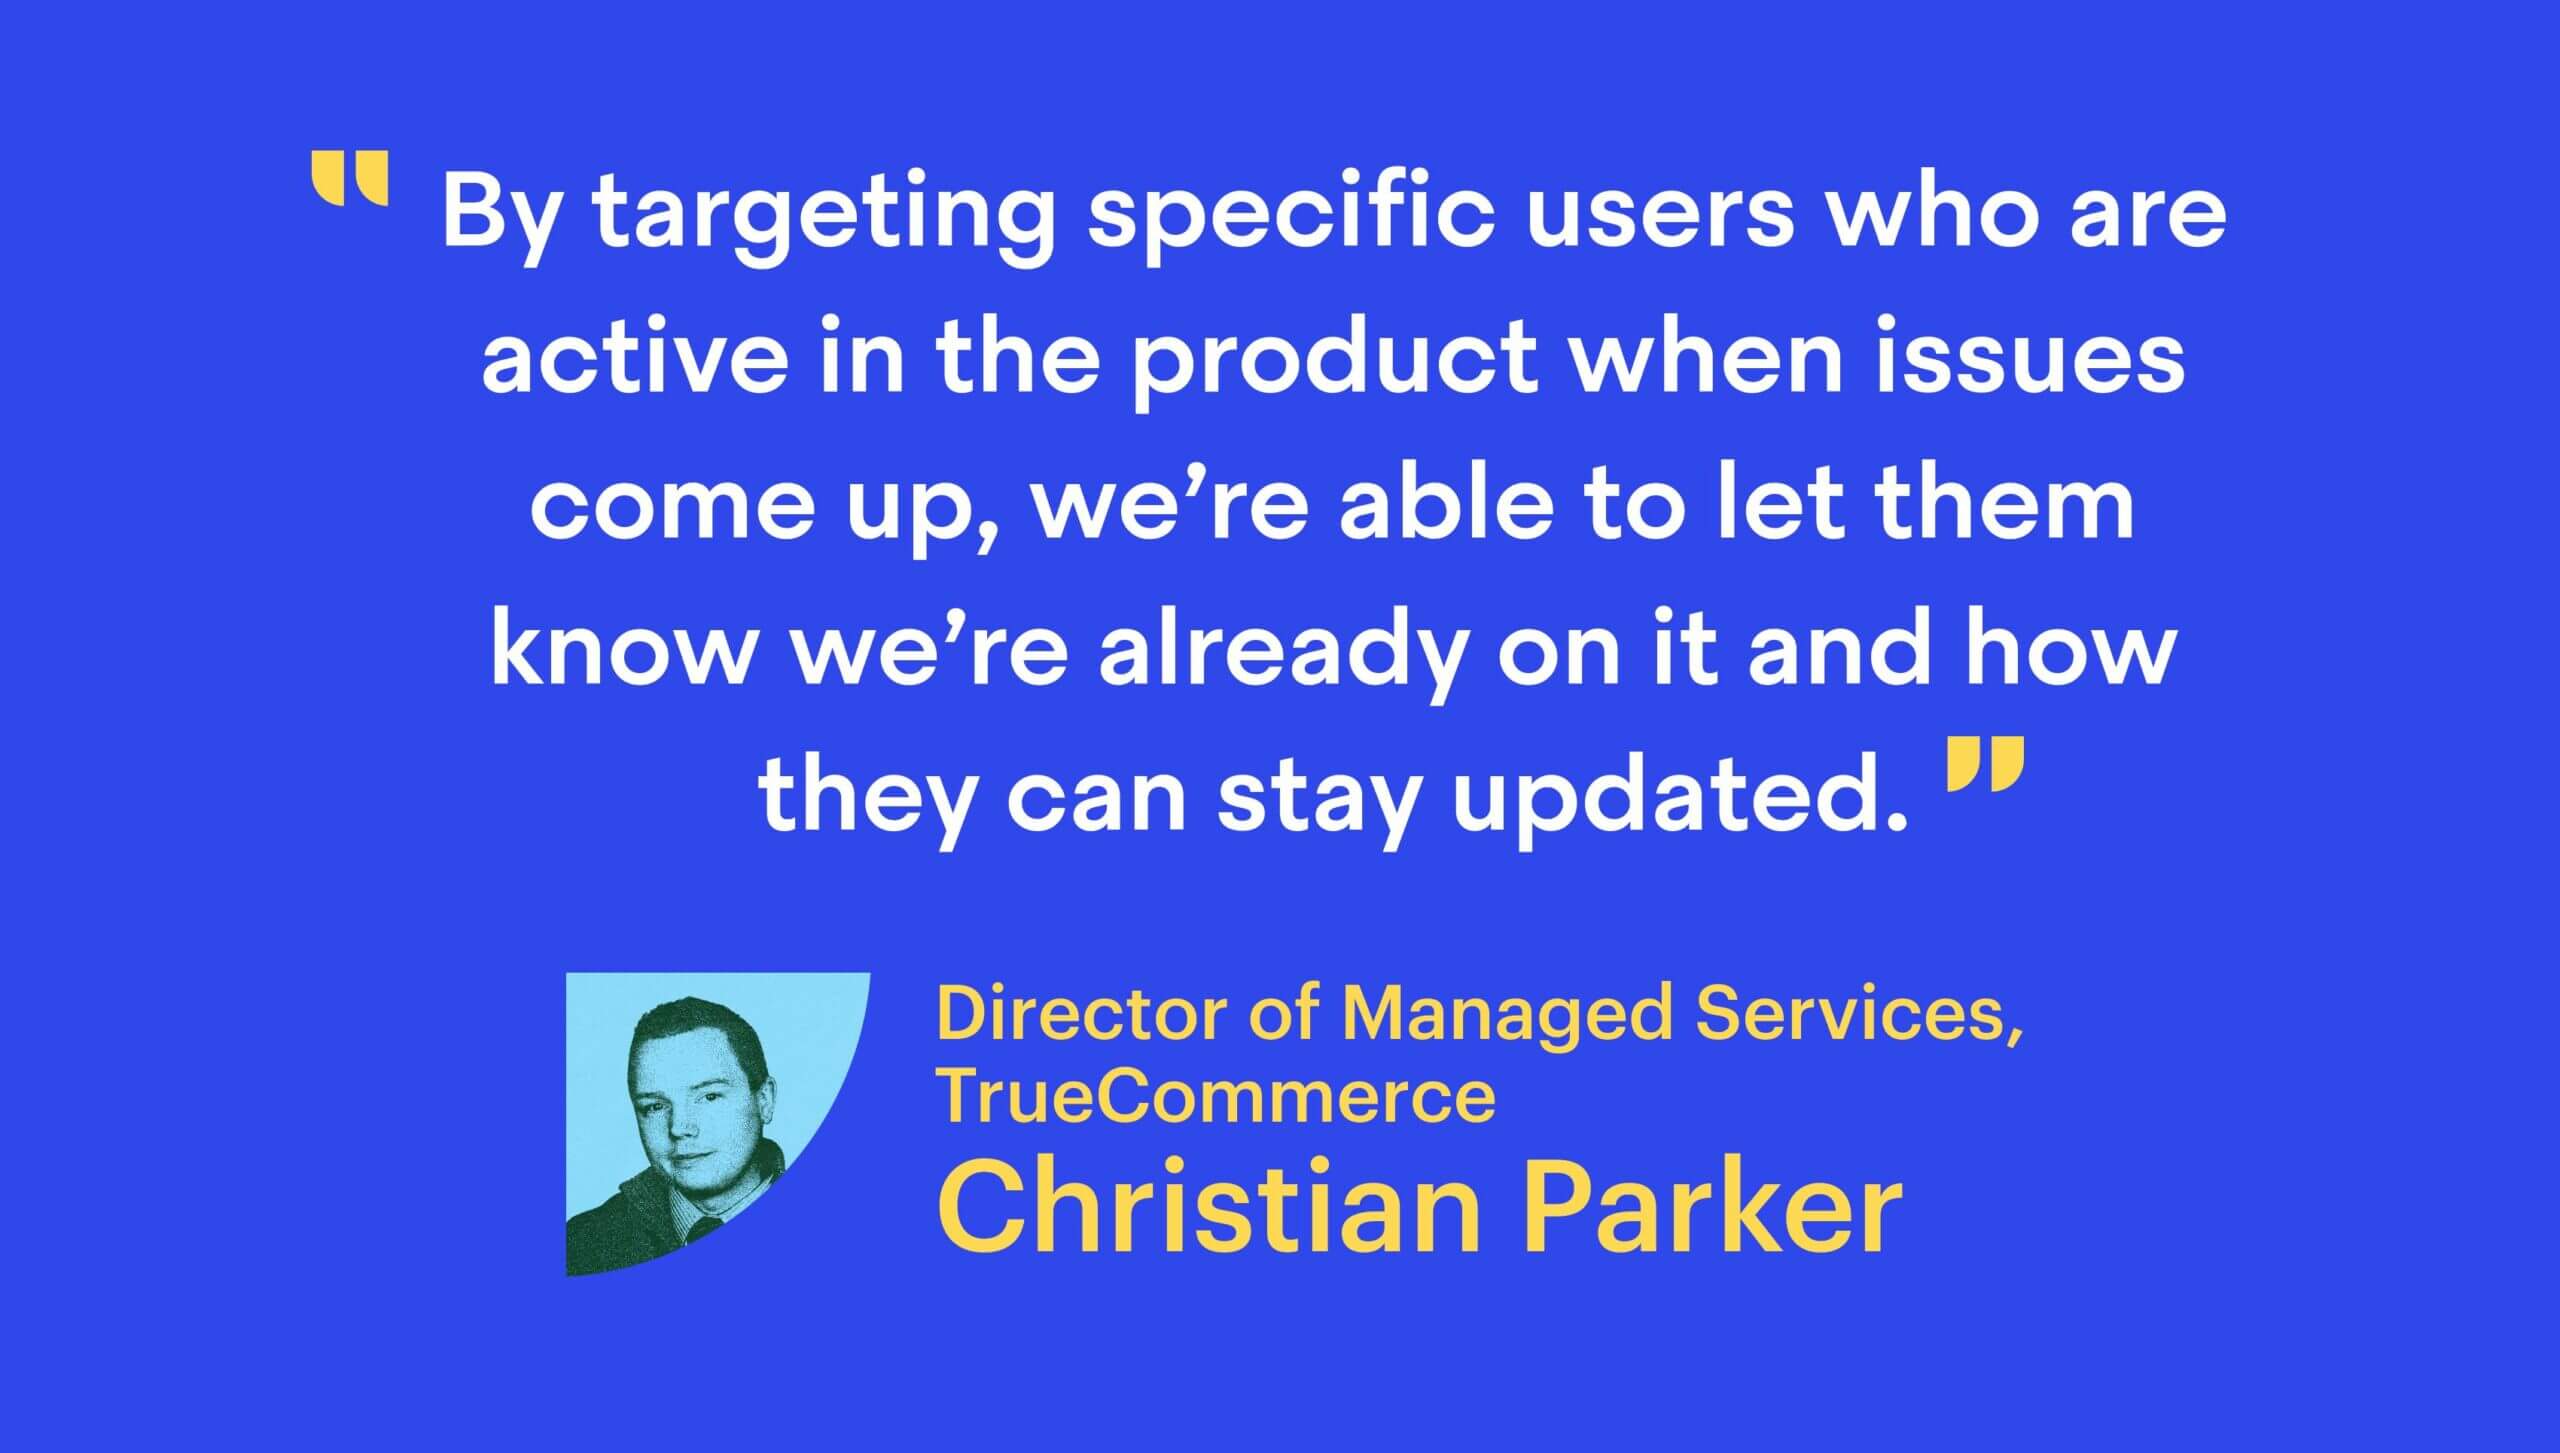 “By targeting specific users who are active in the product when issues come up, we’re able to let them know we’re already on it and how they can stay updated.”